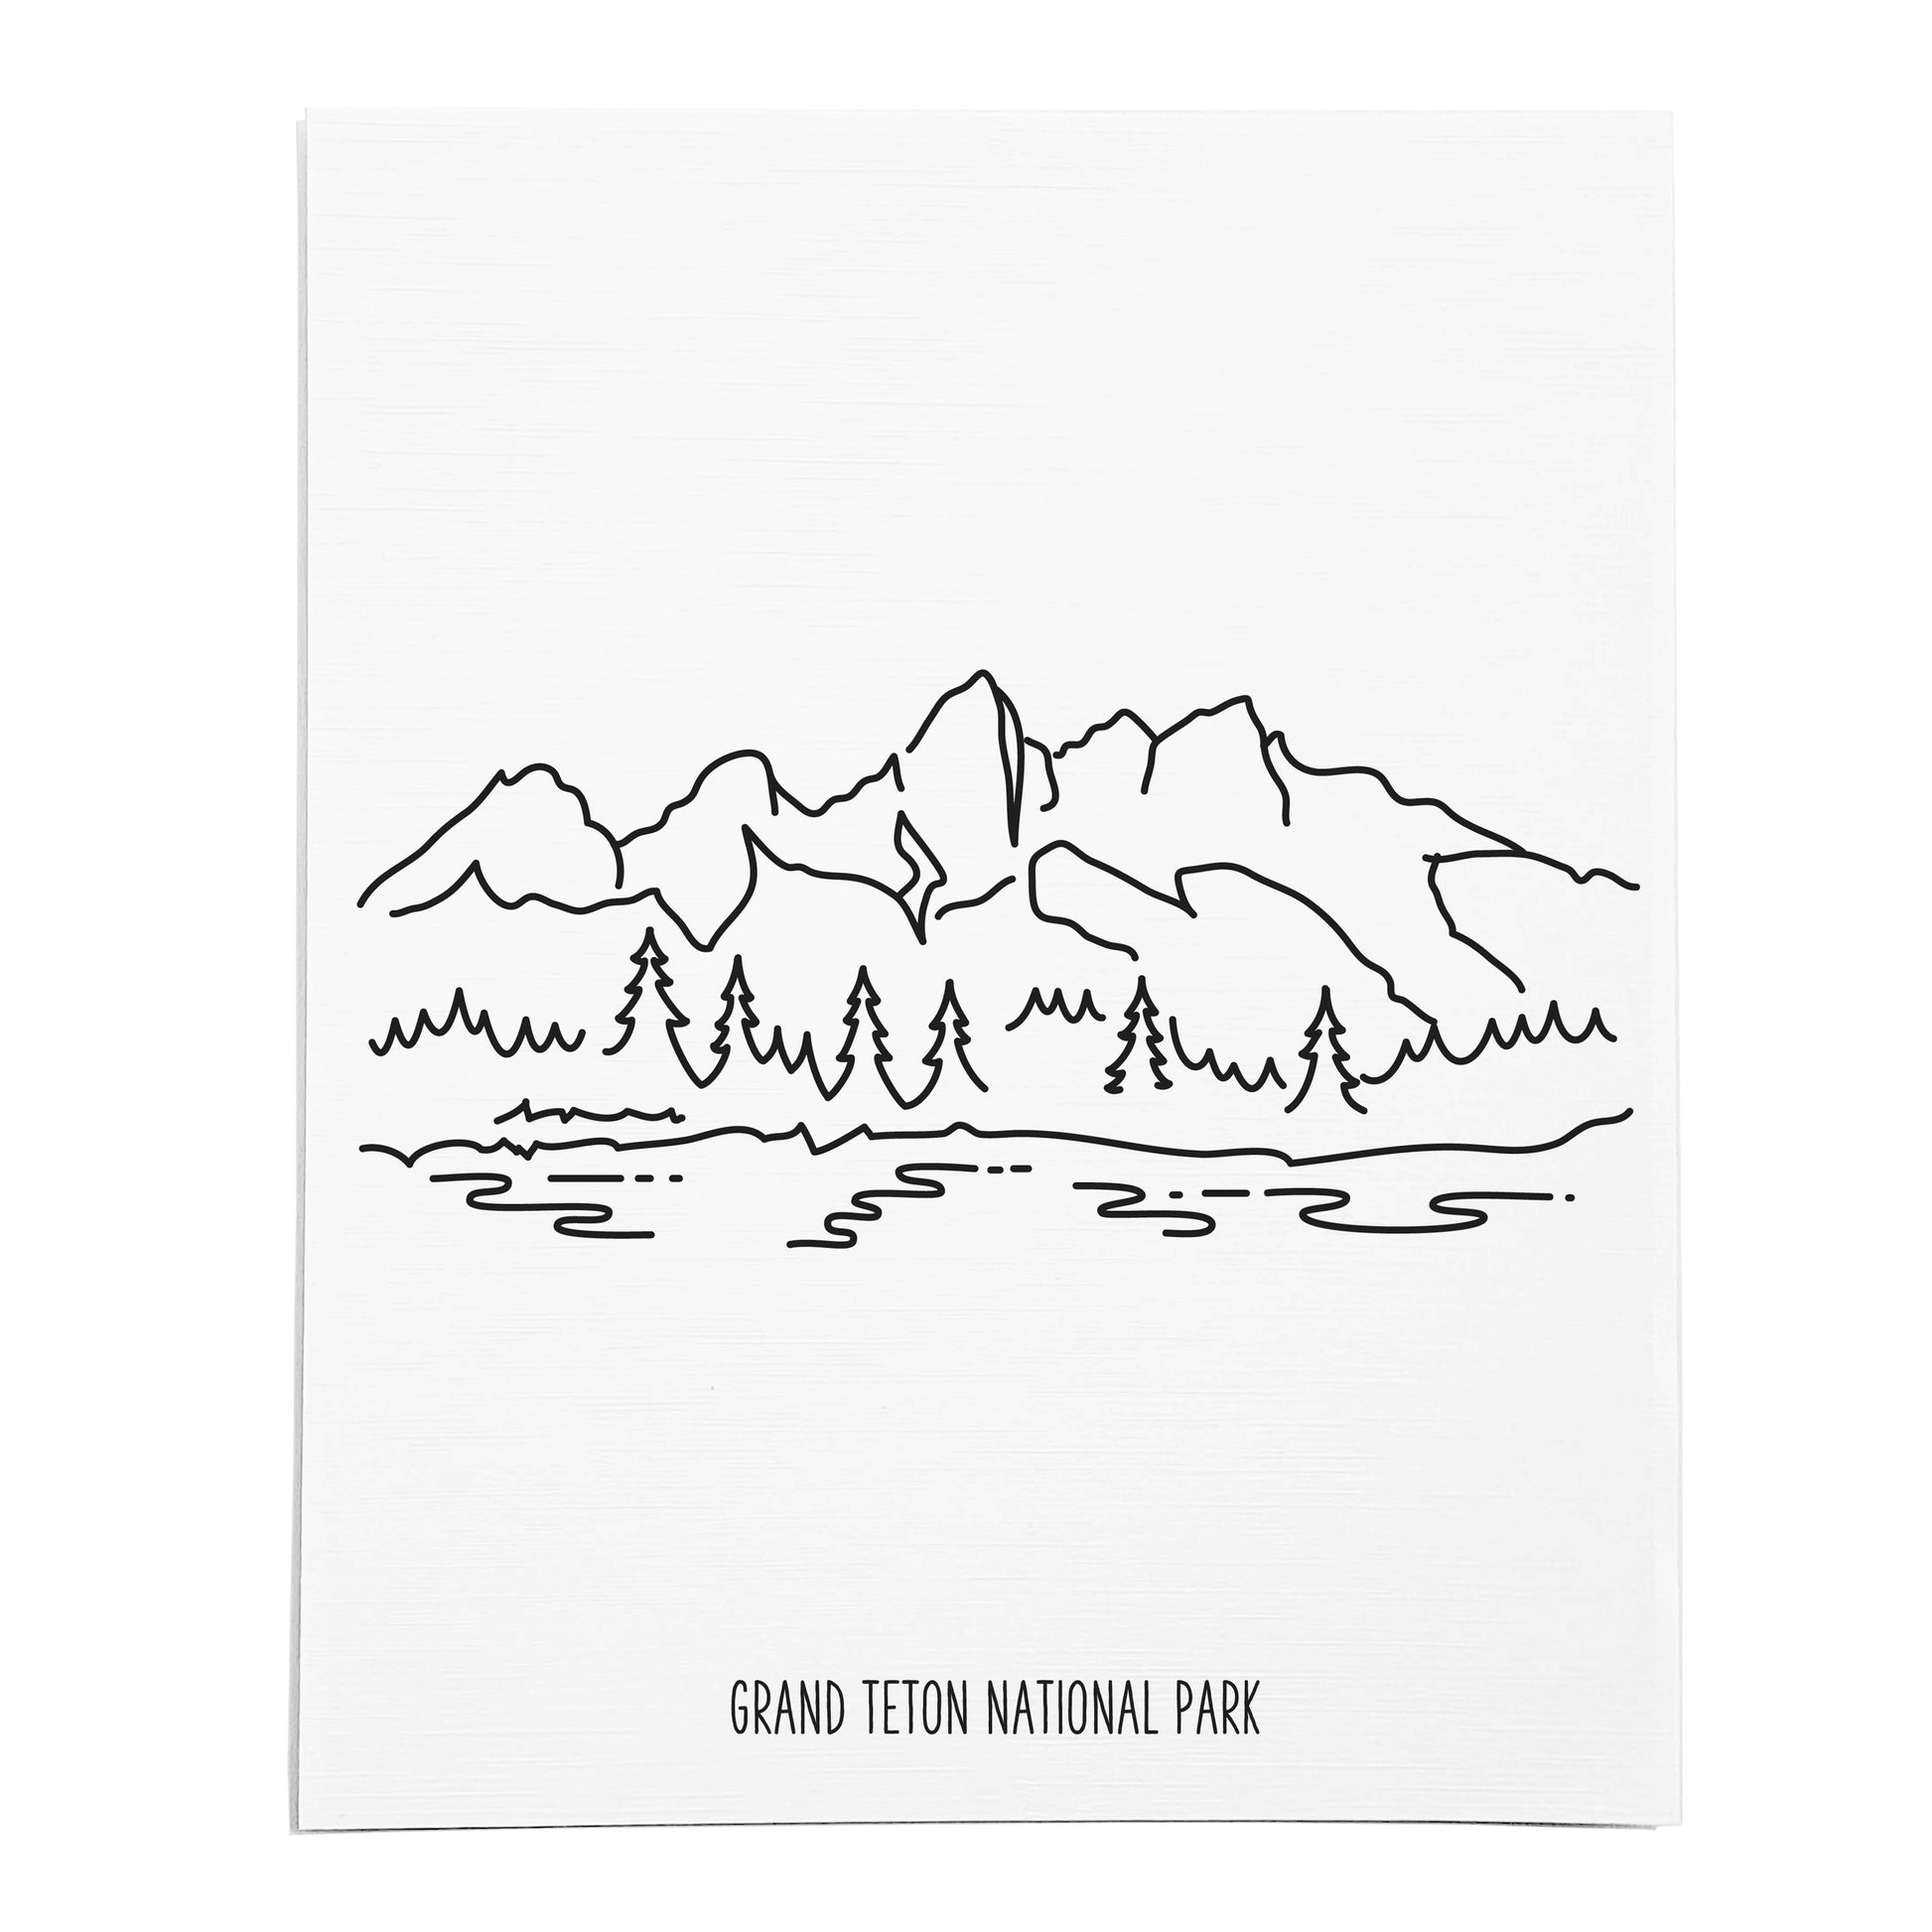 An art print featuring a line drawing of Grand Teton National Park on white linen paper